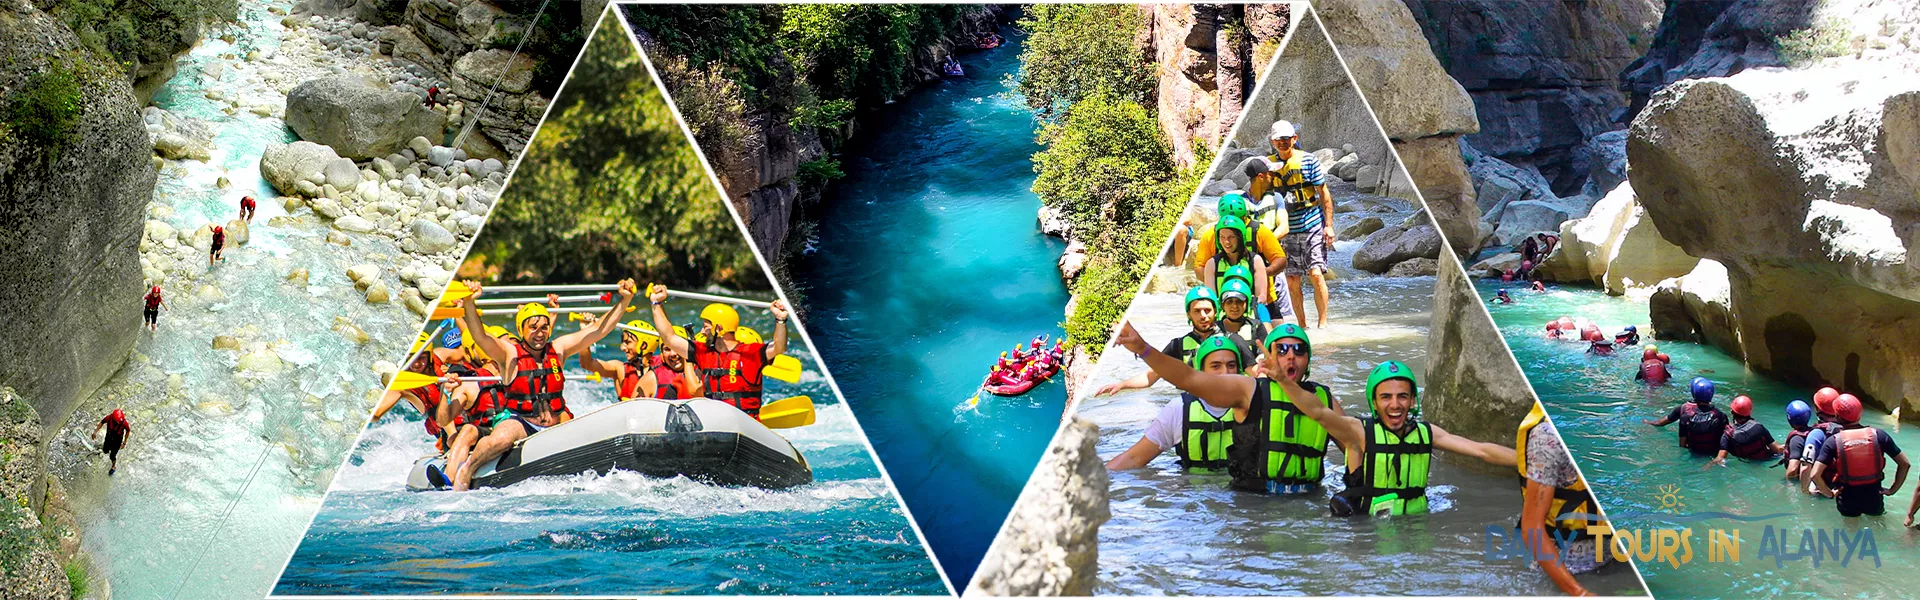 Rafting with Canyoning in Alanya